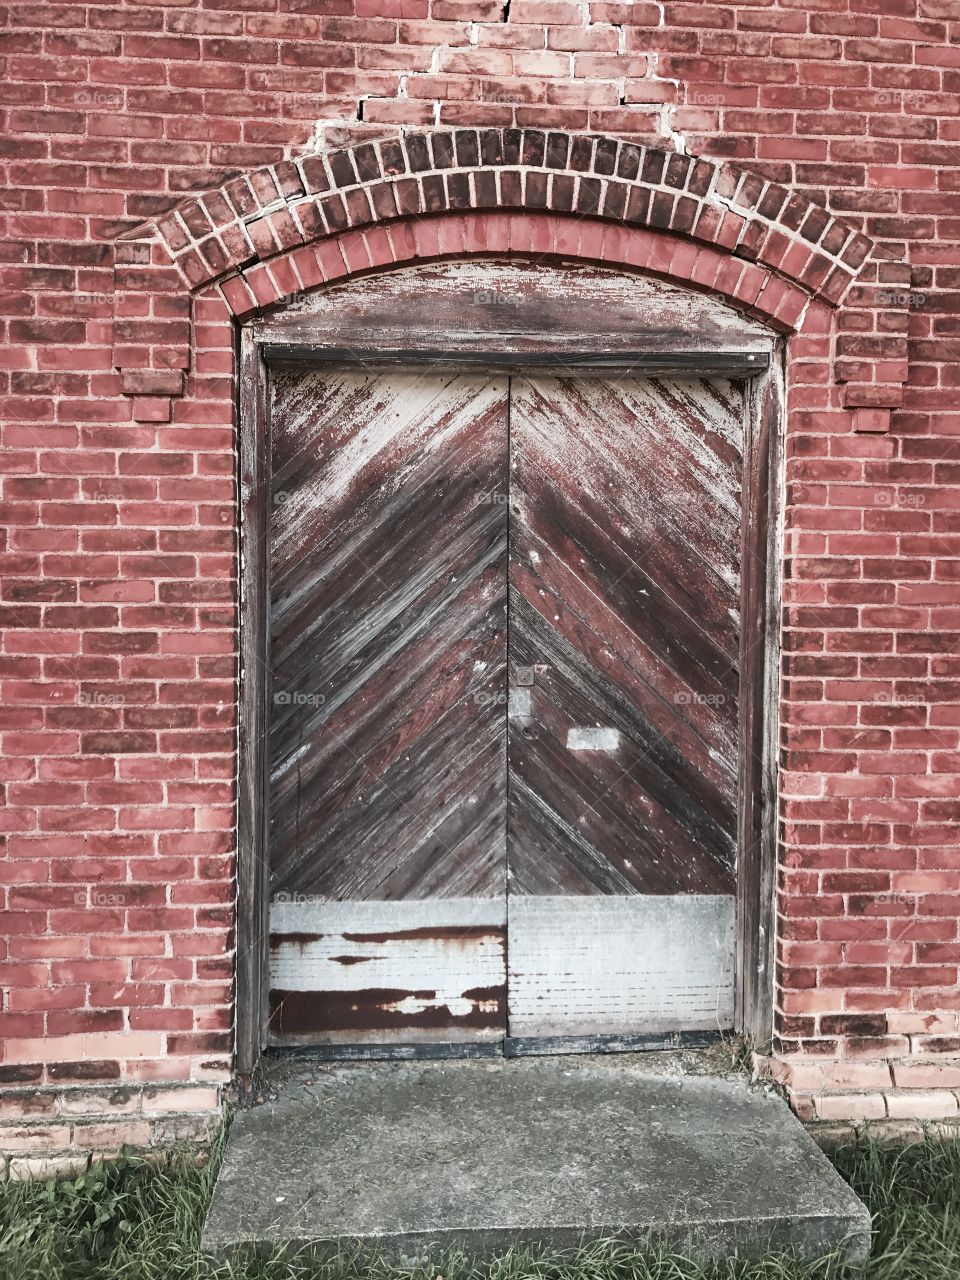 Door to an abandoned building. Gives me spooky vibes 👻